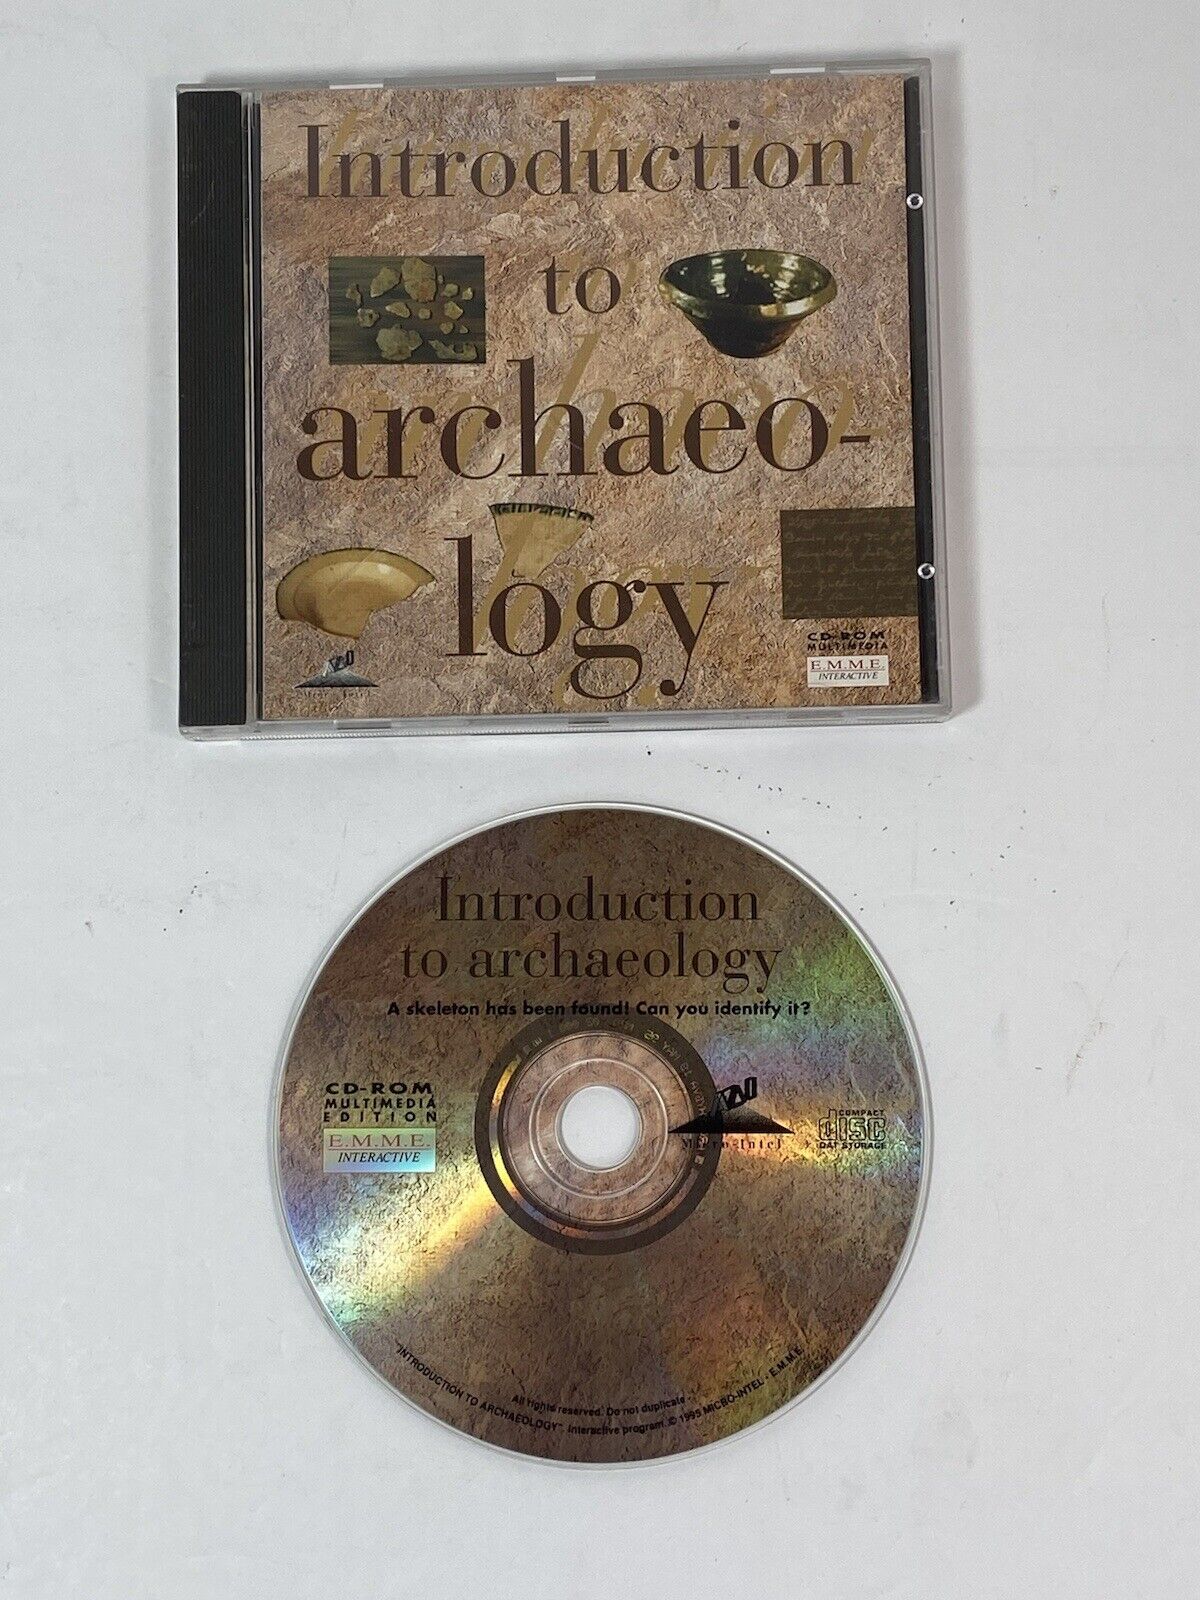 Introduction To Archaeology Interactive CD ROM 1995 For Mac & PC